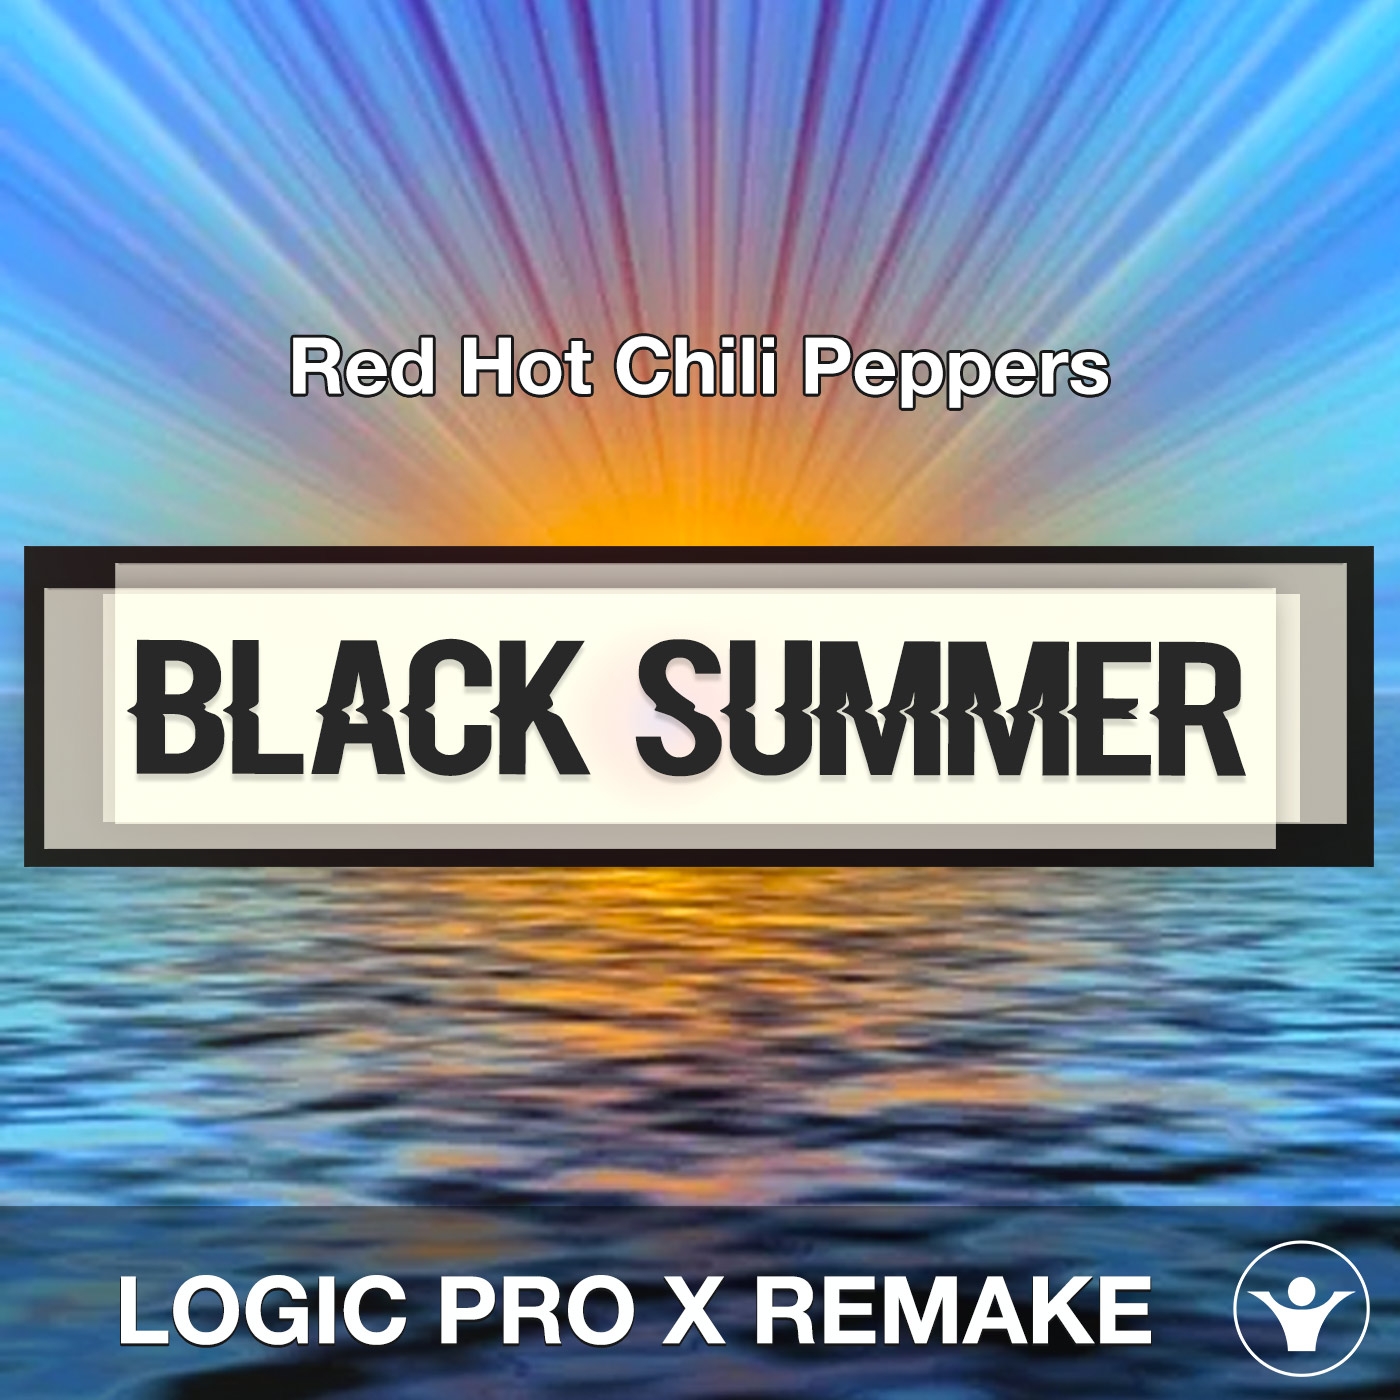 Black Summer (Red Hot Chili Peppers) - Logic Pro X Remake Template